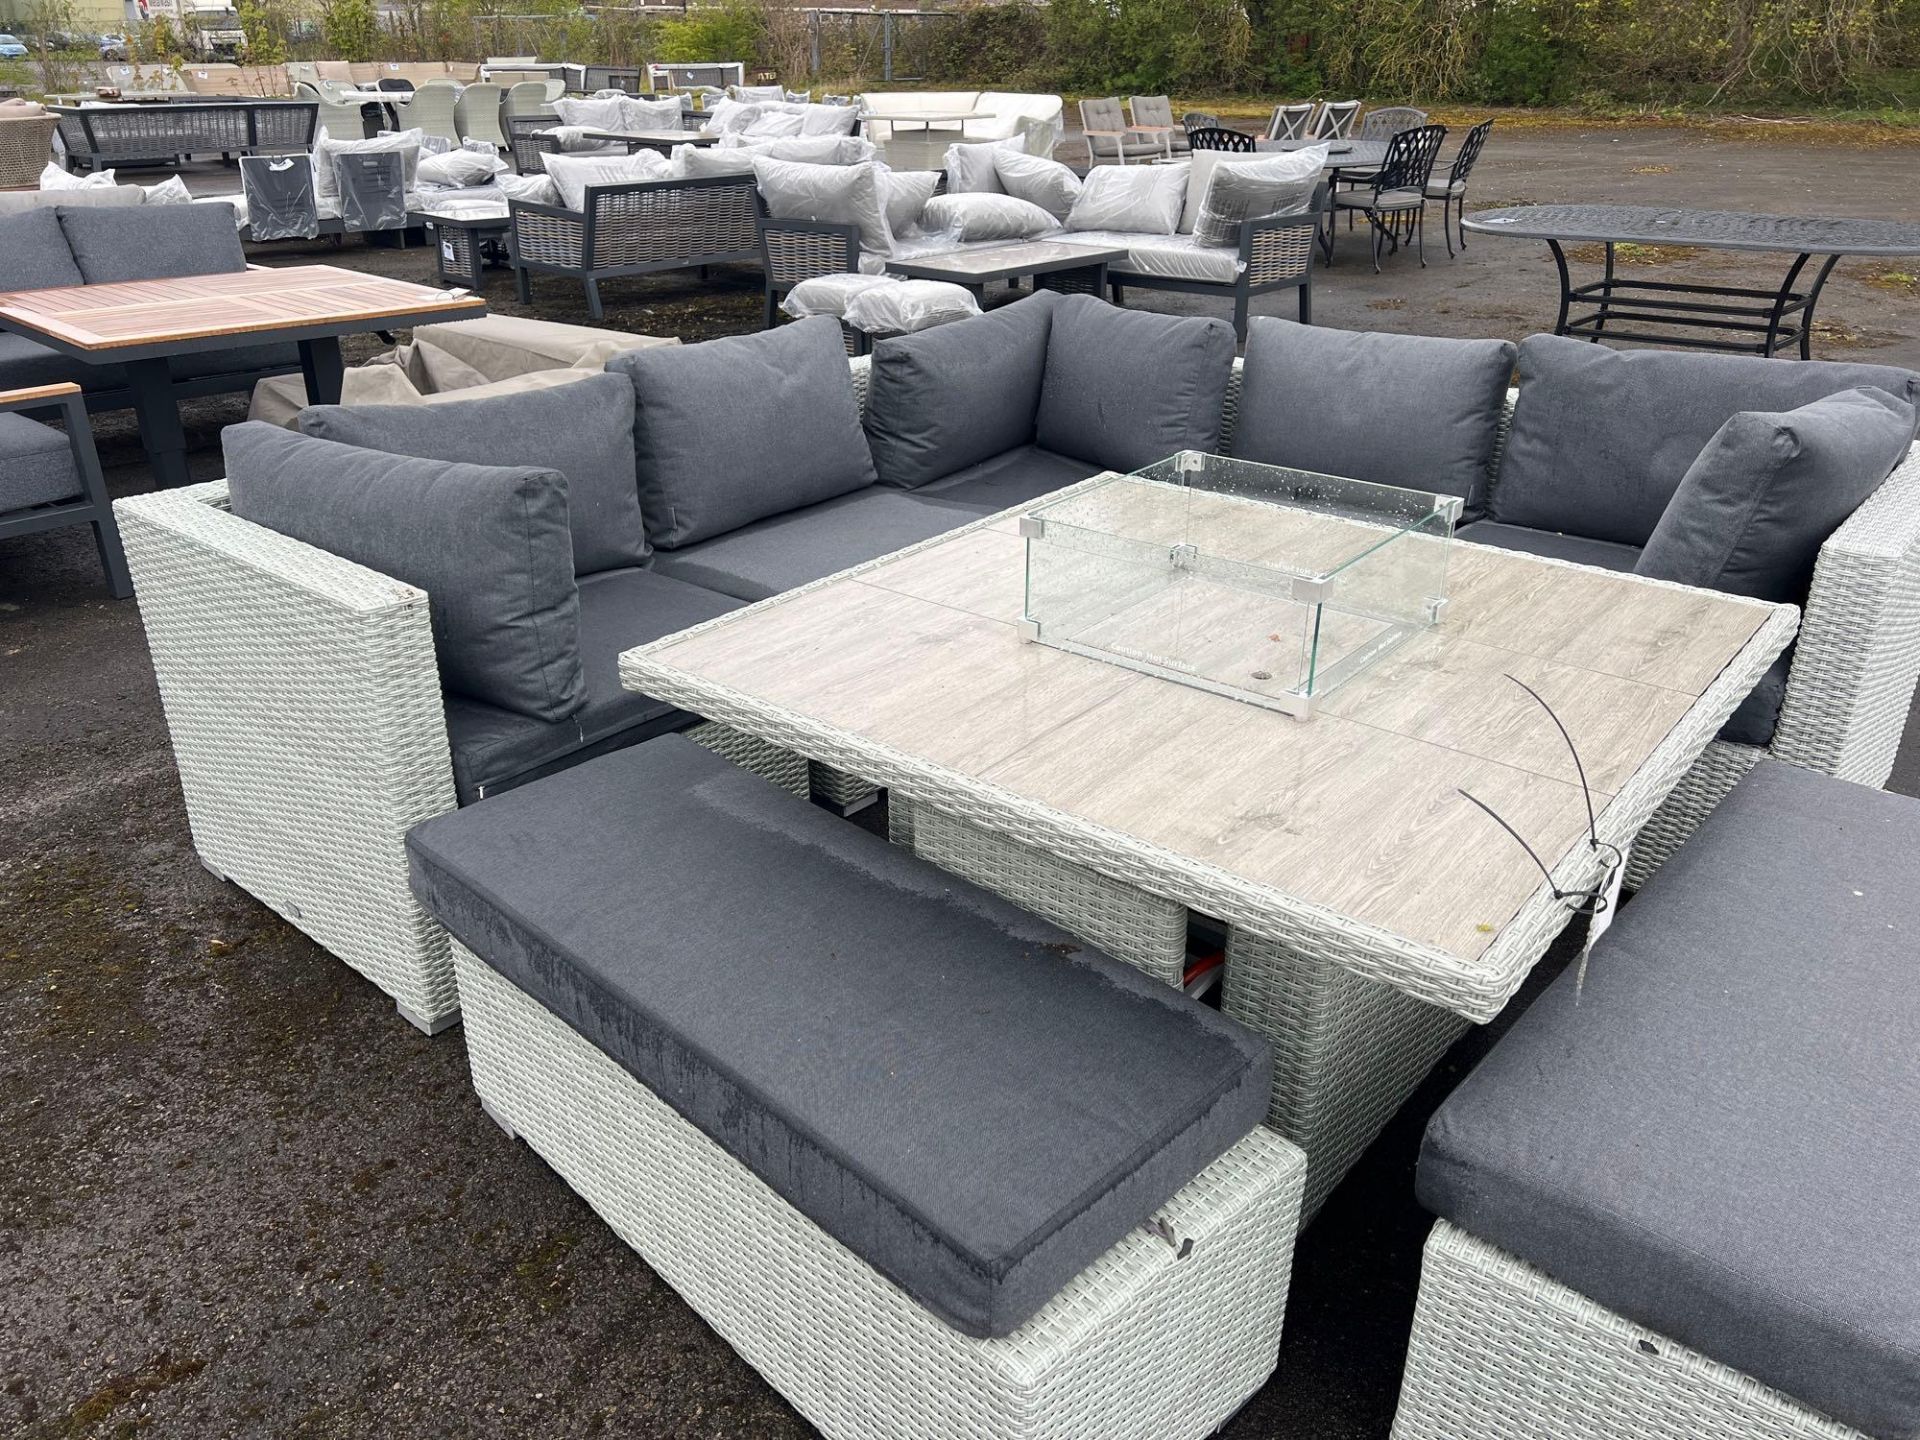 A6 Kingscote Cloud Modular Sofa With Square Firepit Table and 2 x Benches The Kingscote Cloud